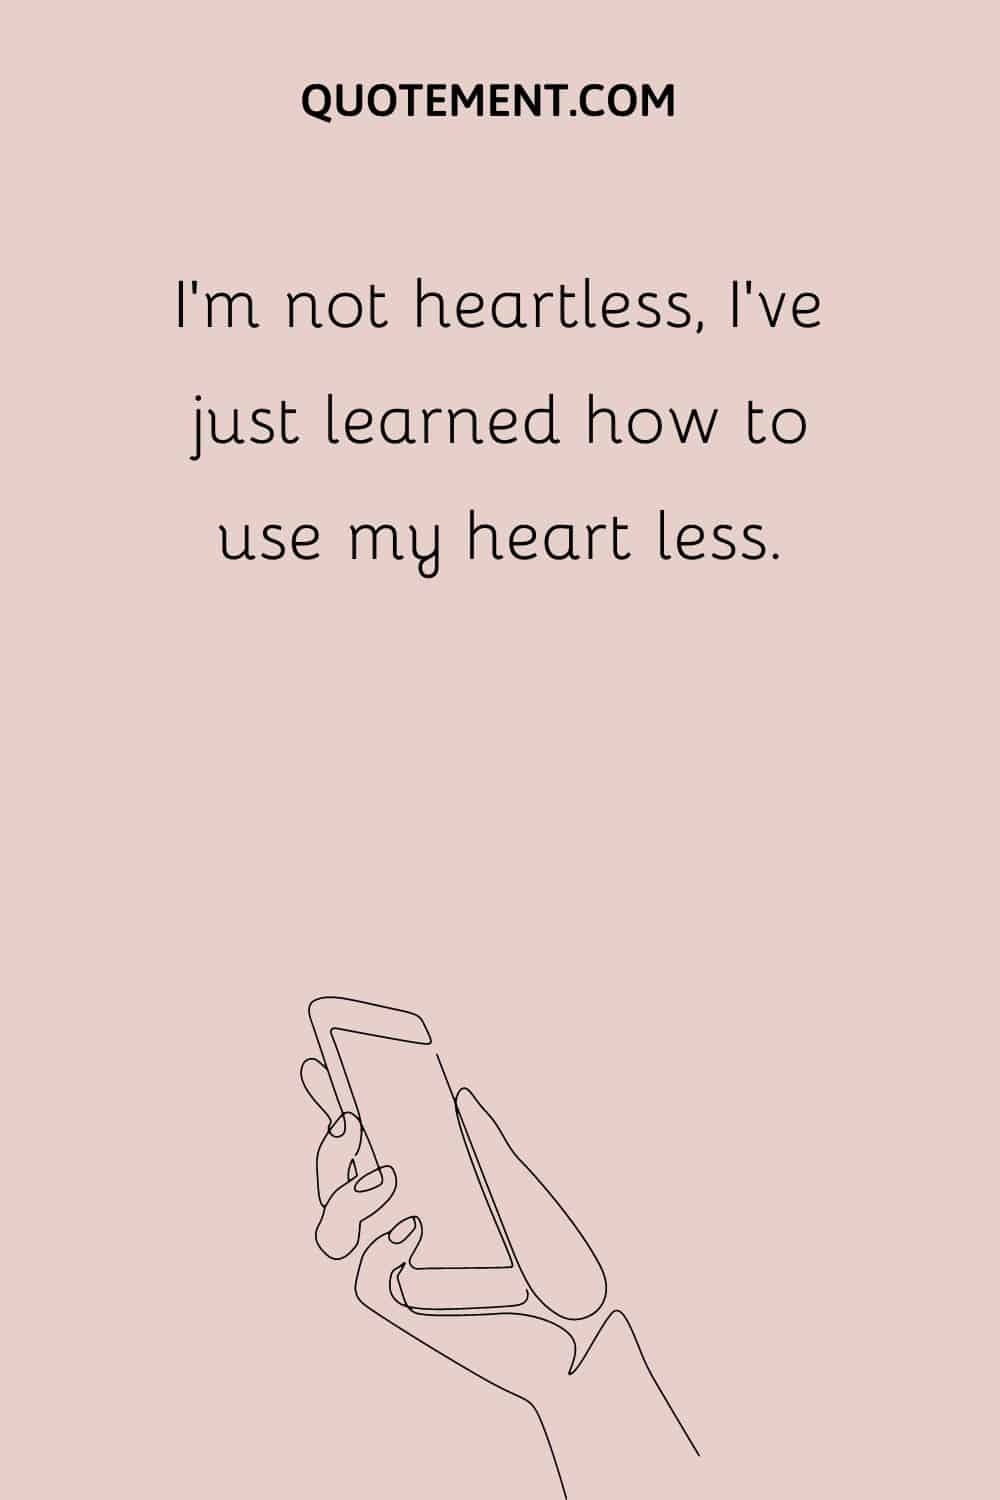 I'm not heartless, I've just learned how to use my heart less